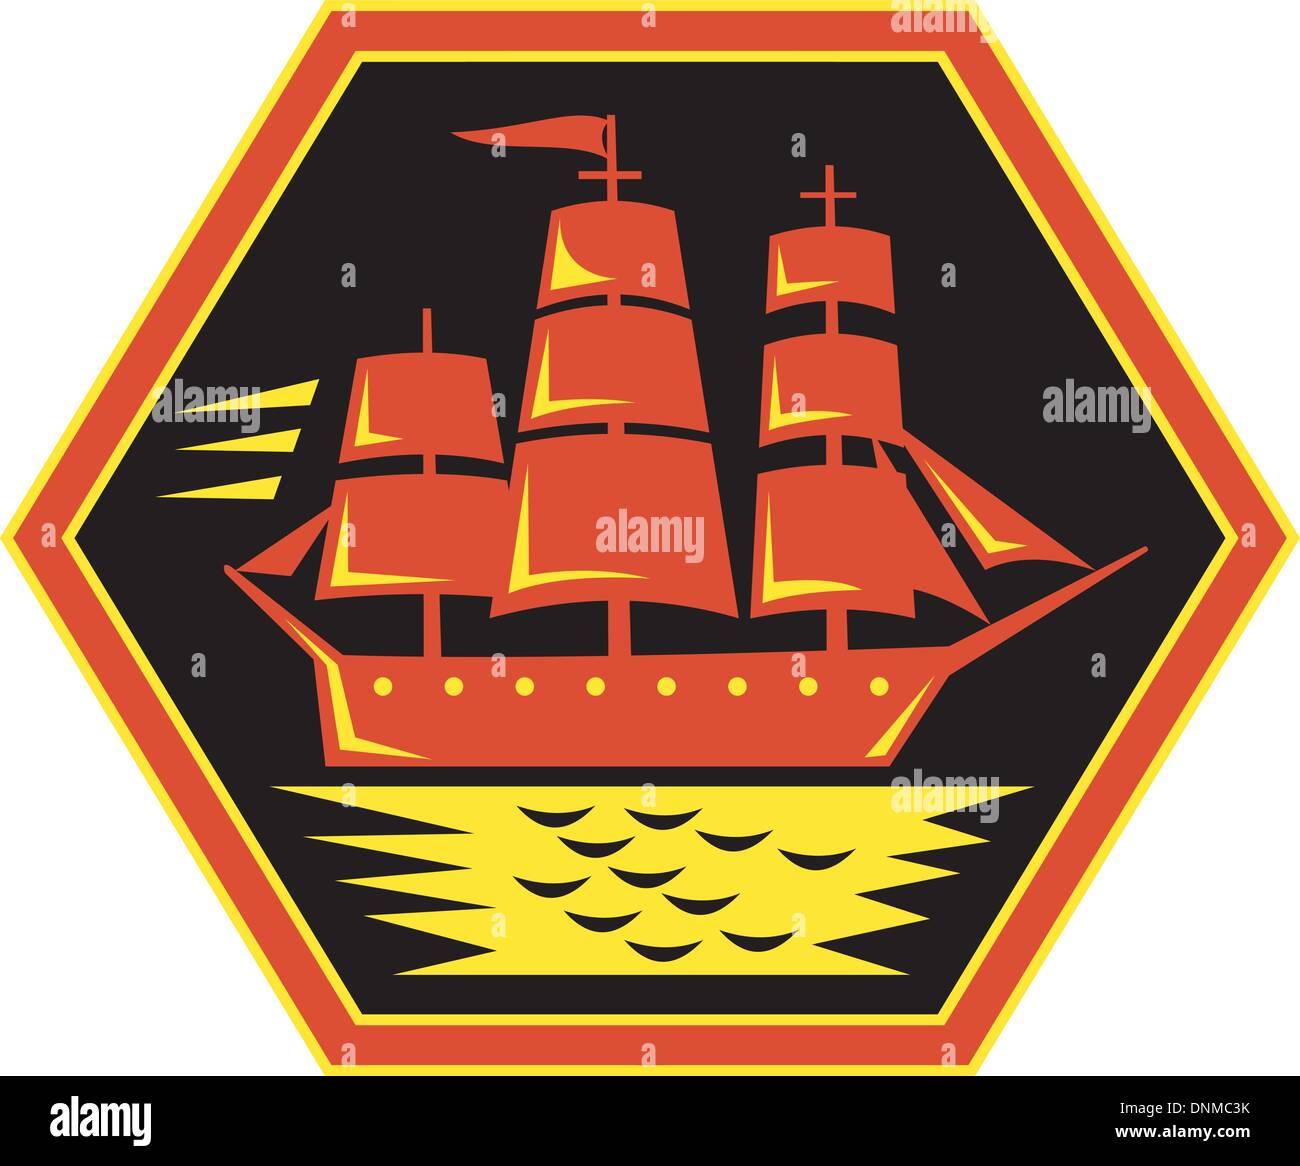 illustration of a sailing ship or clipper Stock Vector